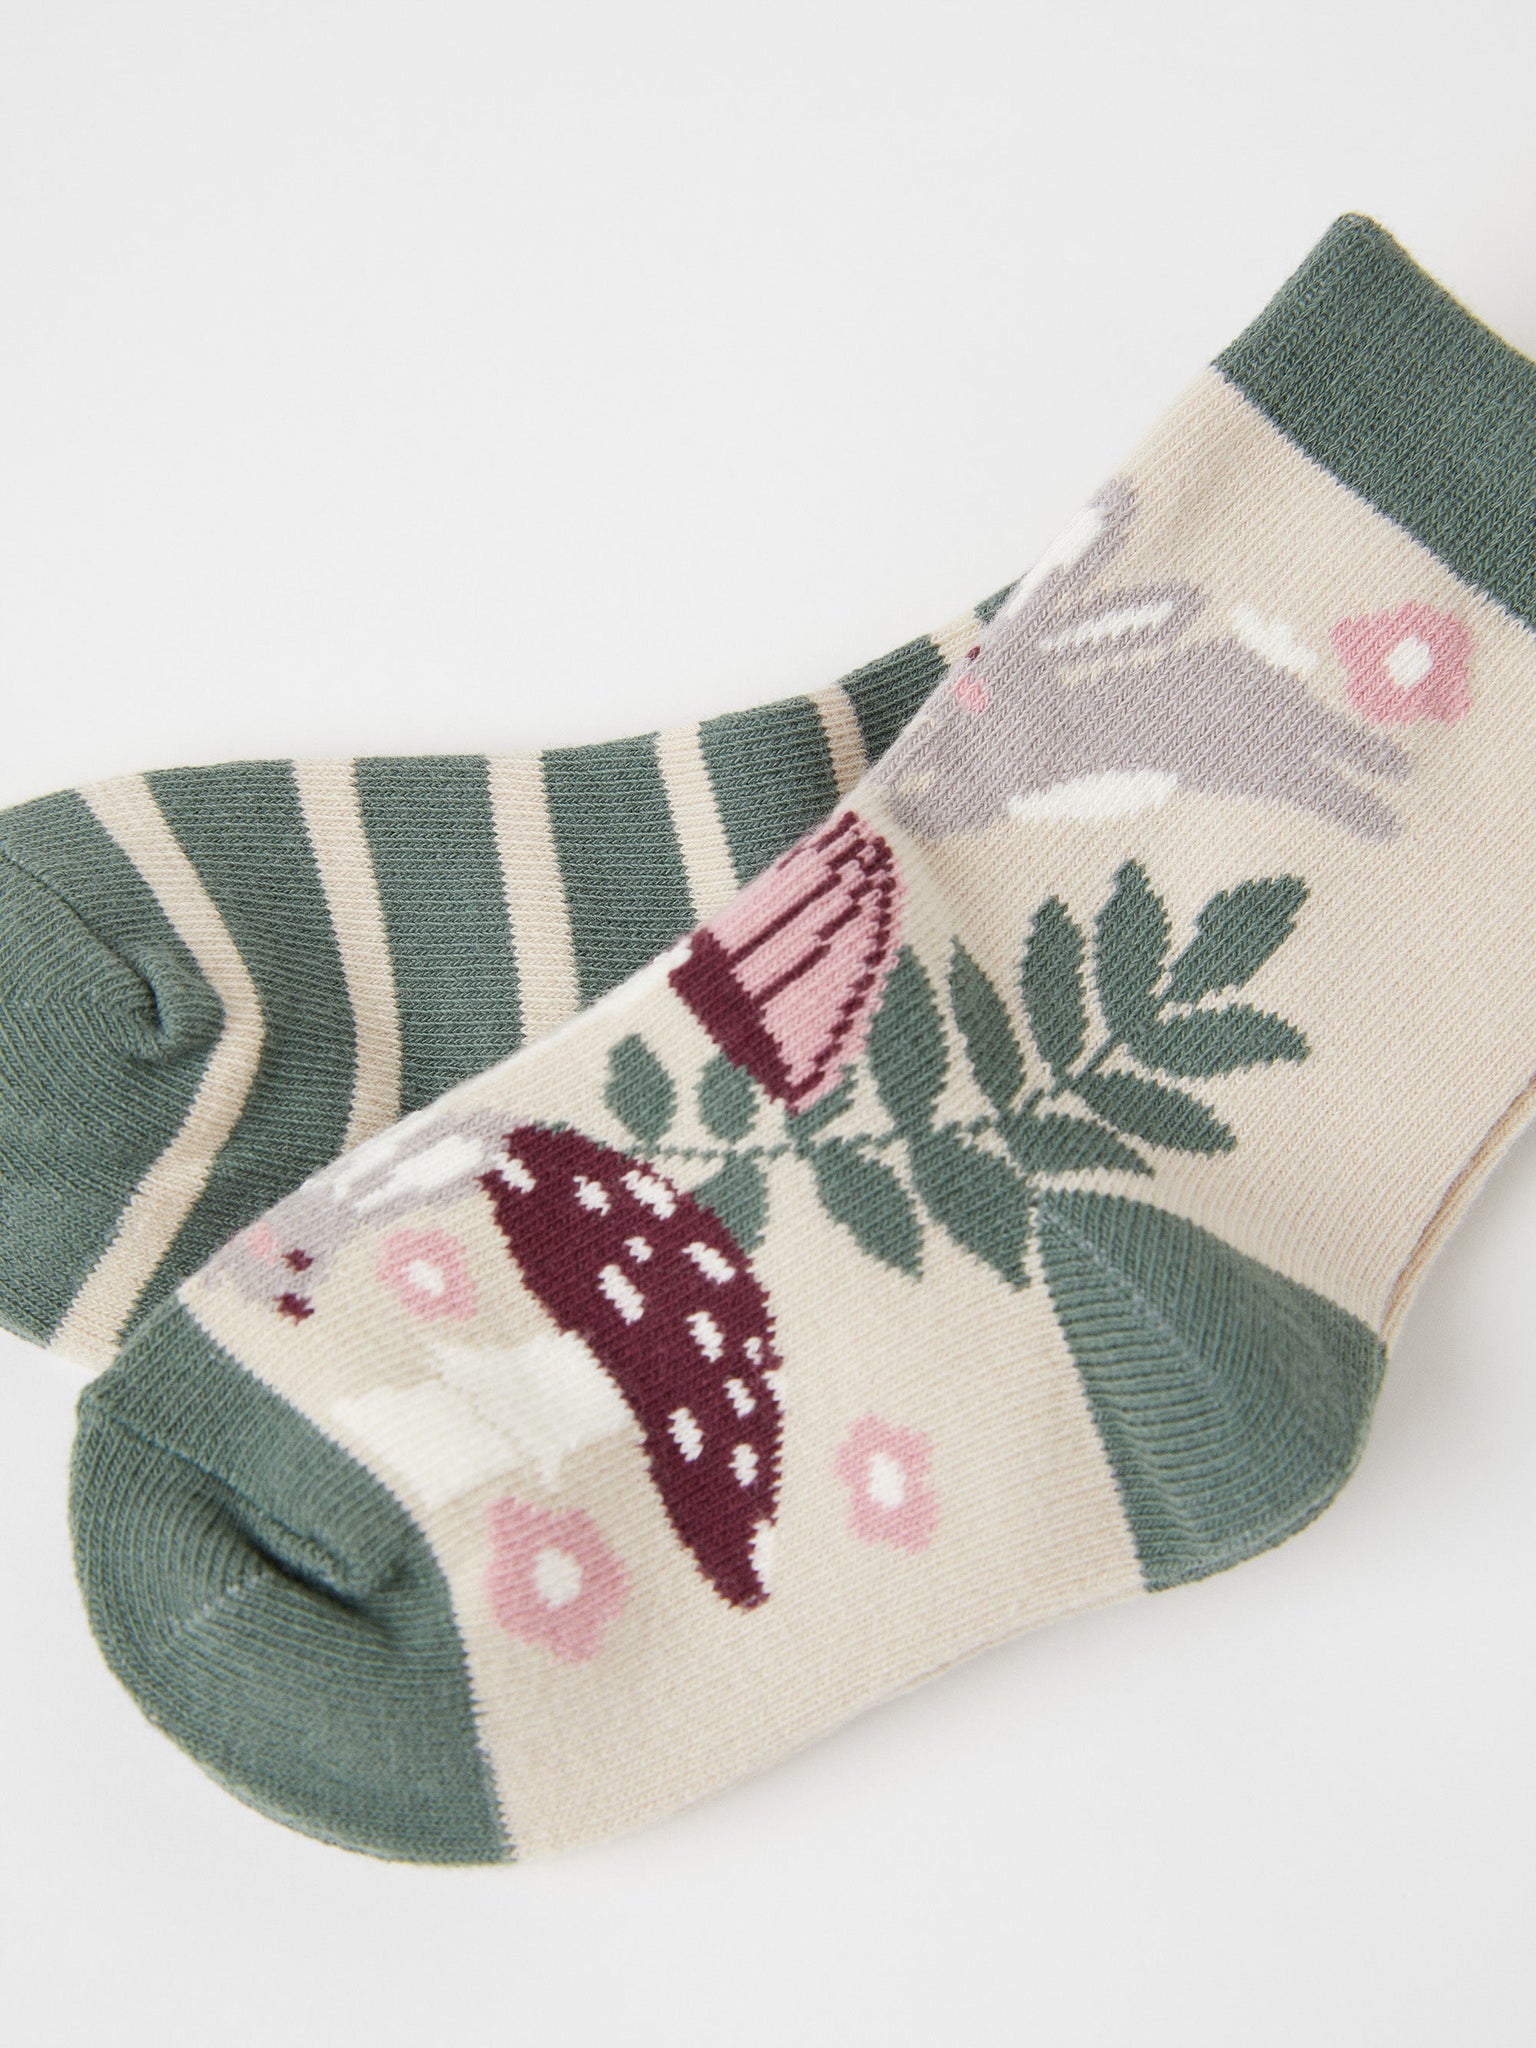 Organic Cotton Kids Socks Multipack from the Polarn O. Pyret kids collection. Clothes made using sustainably sourced materials.